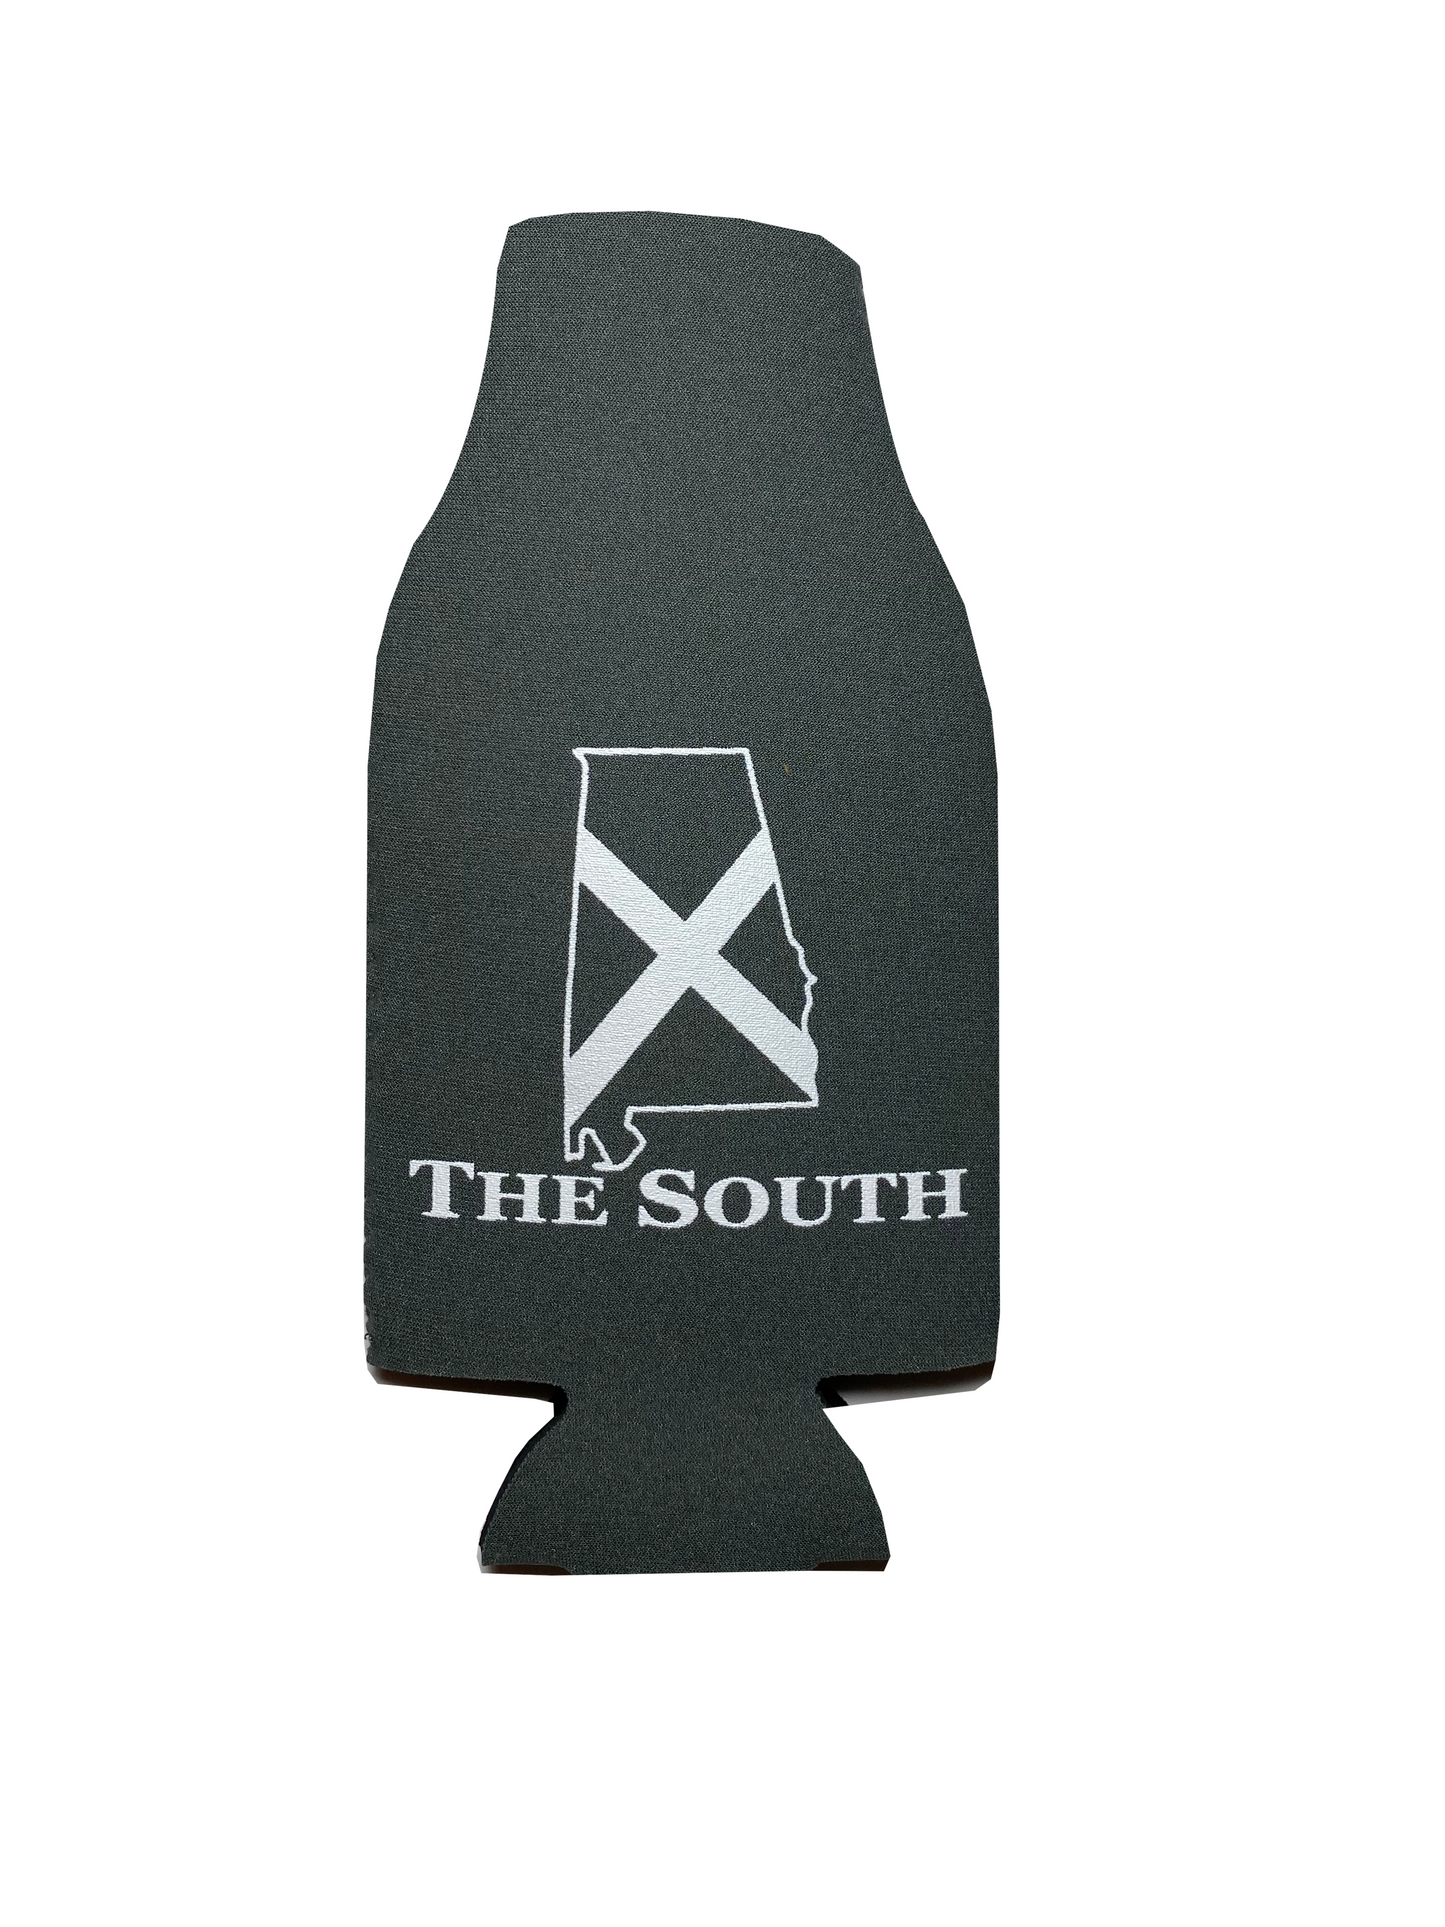 Bottle Koozie - The South